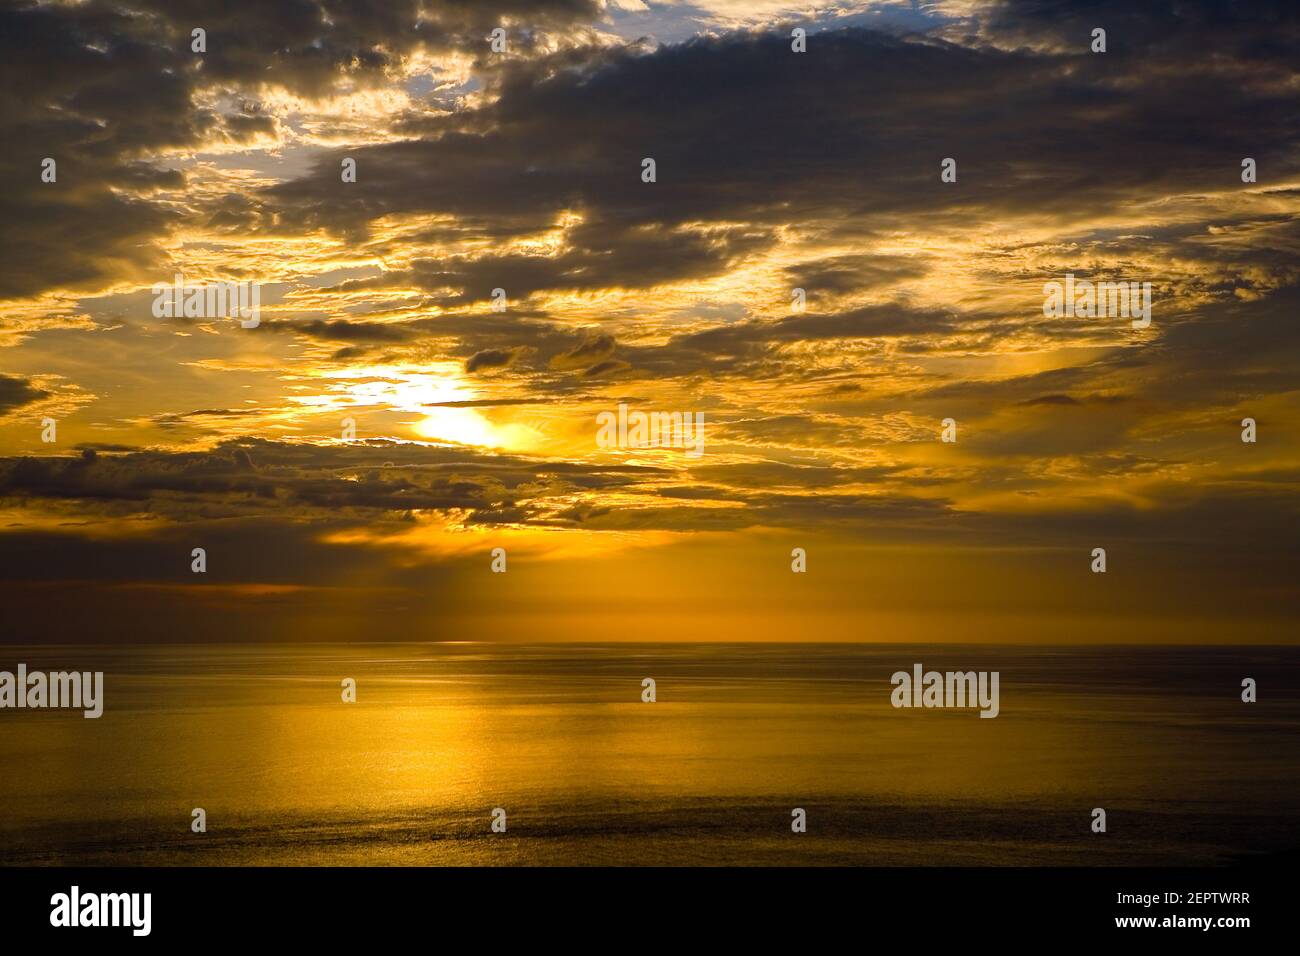 Colorful golden sunset and cloudy sky at the sea. Nature. Stock Photo